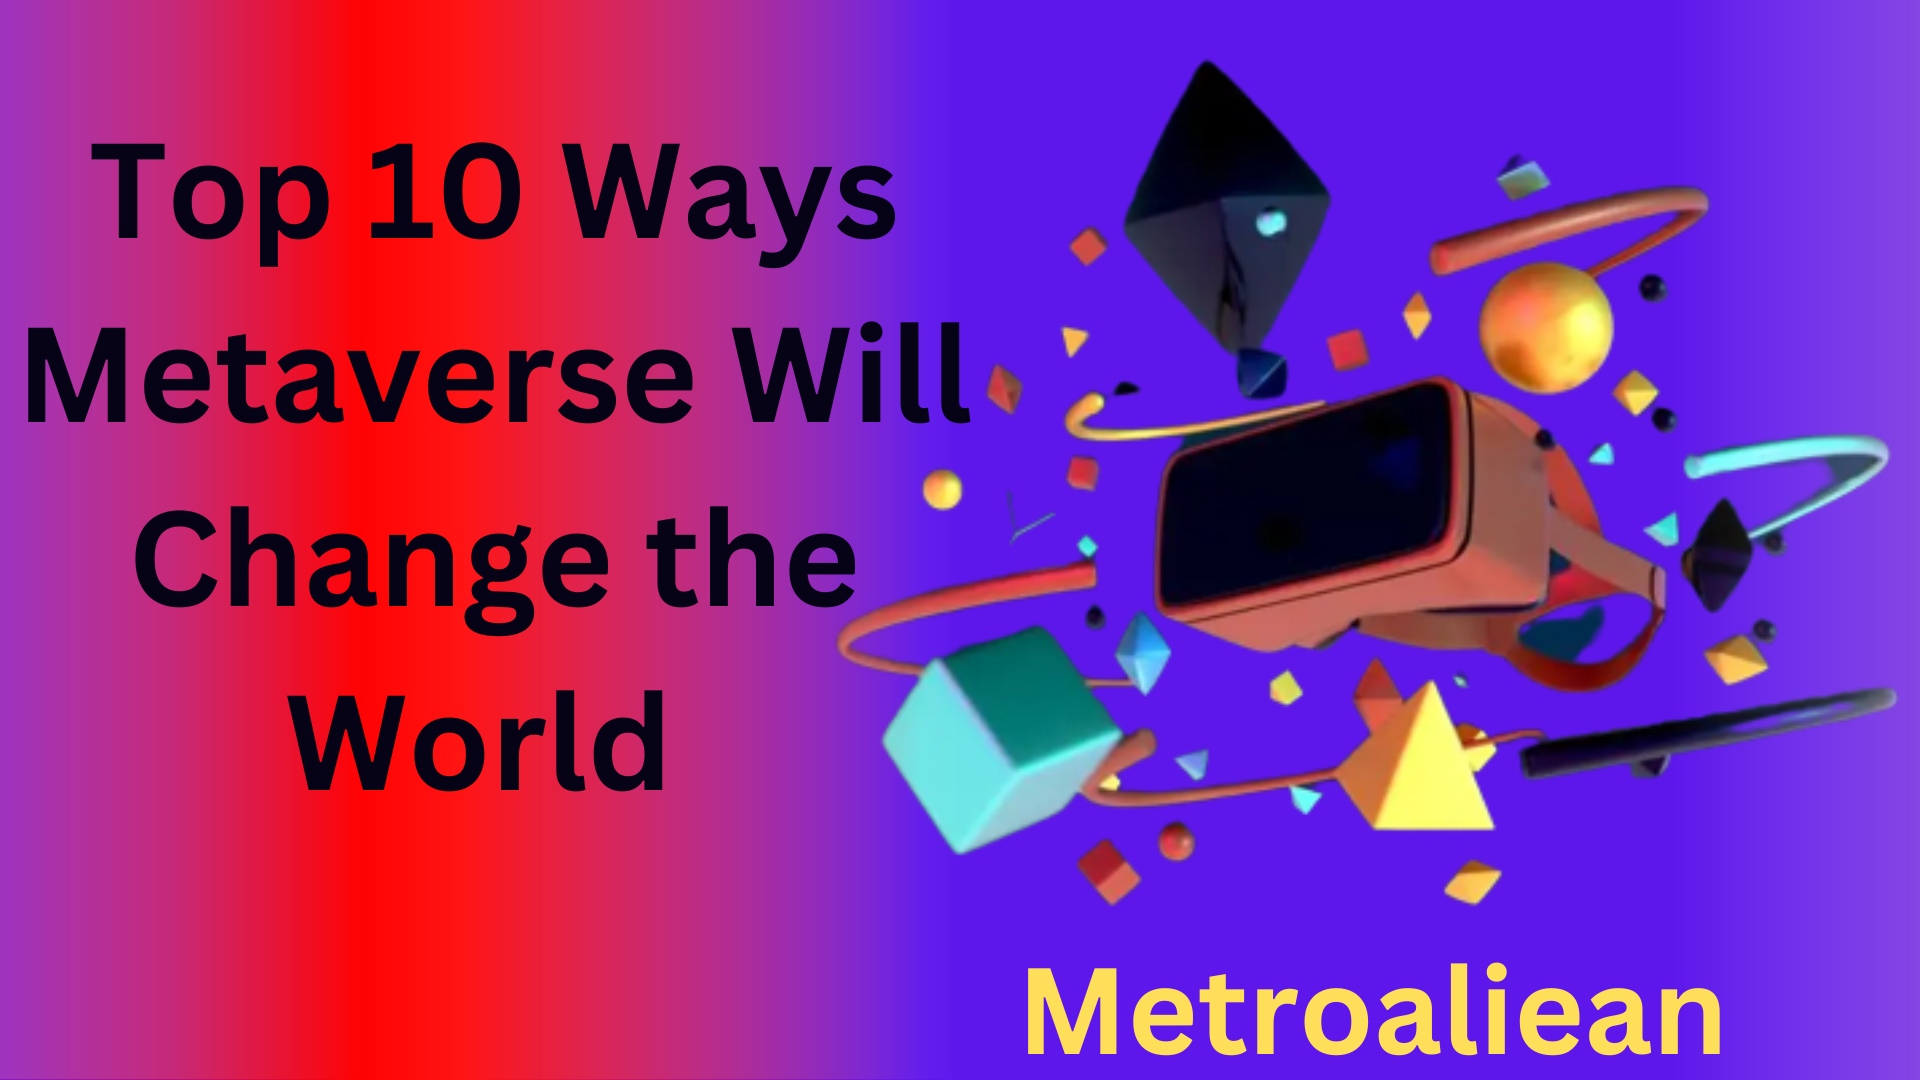 Top 10 Ways Metaverse Will Change the World We Live in